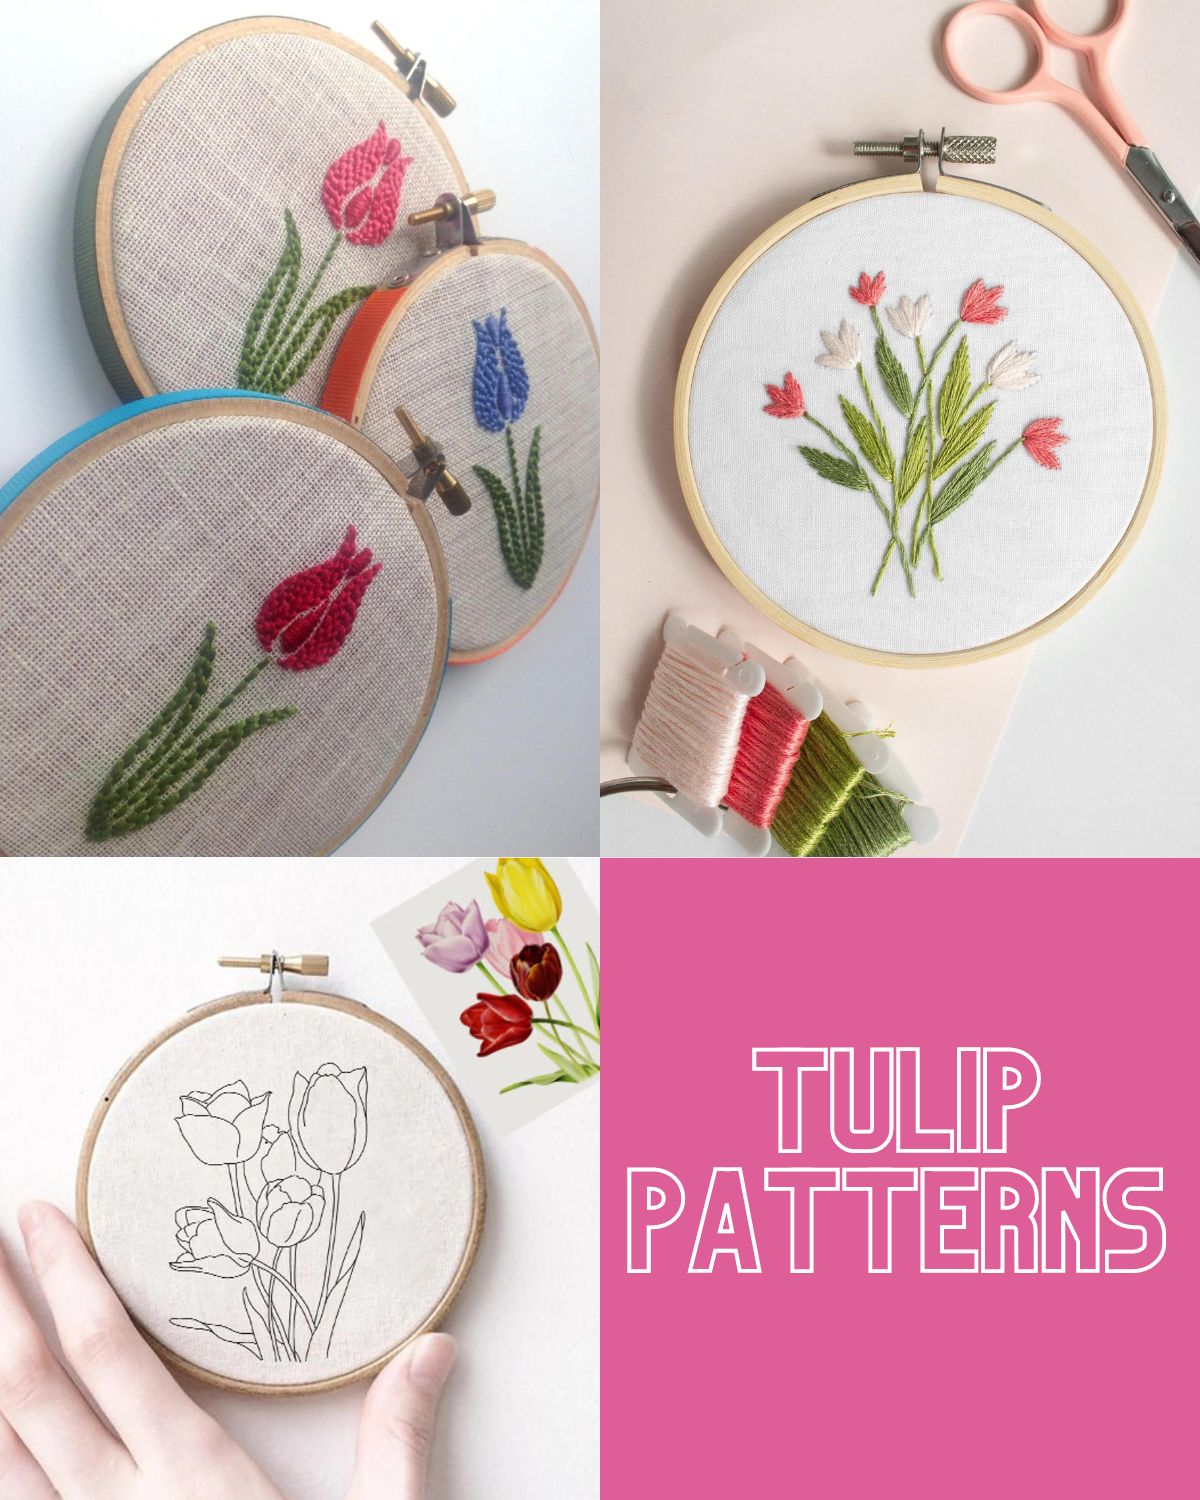 Three embroidery pieces of flowers